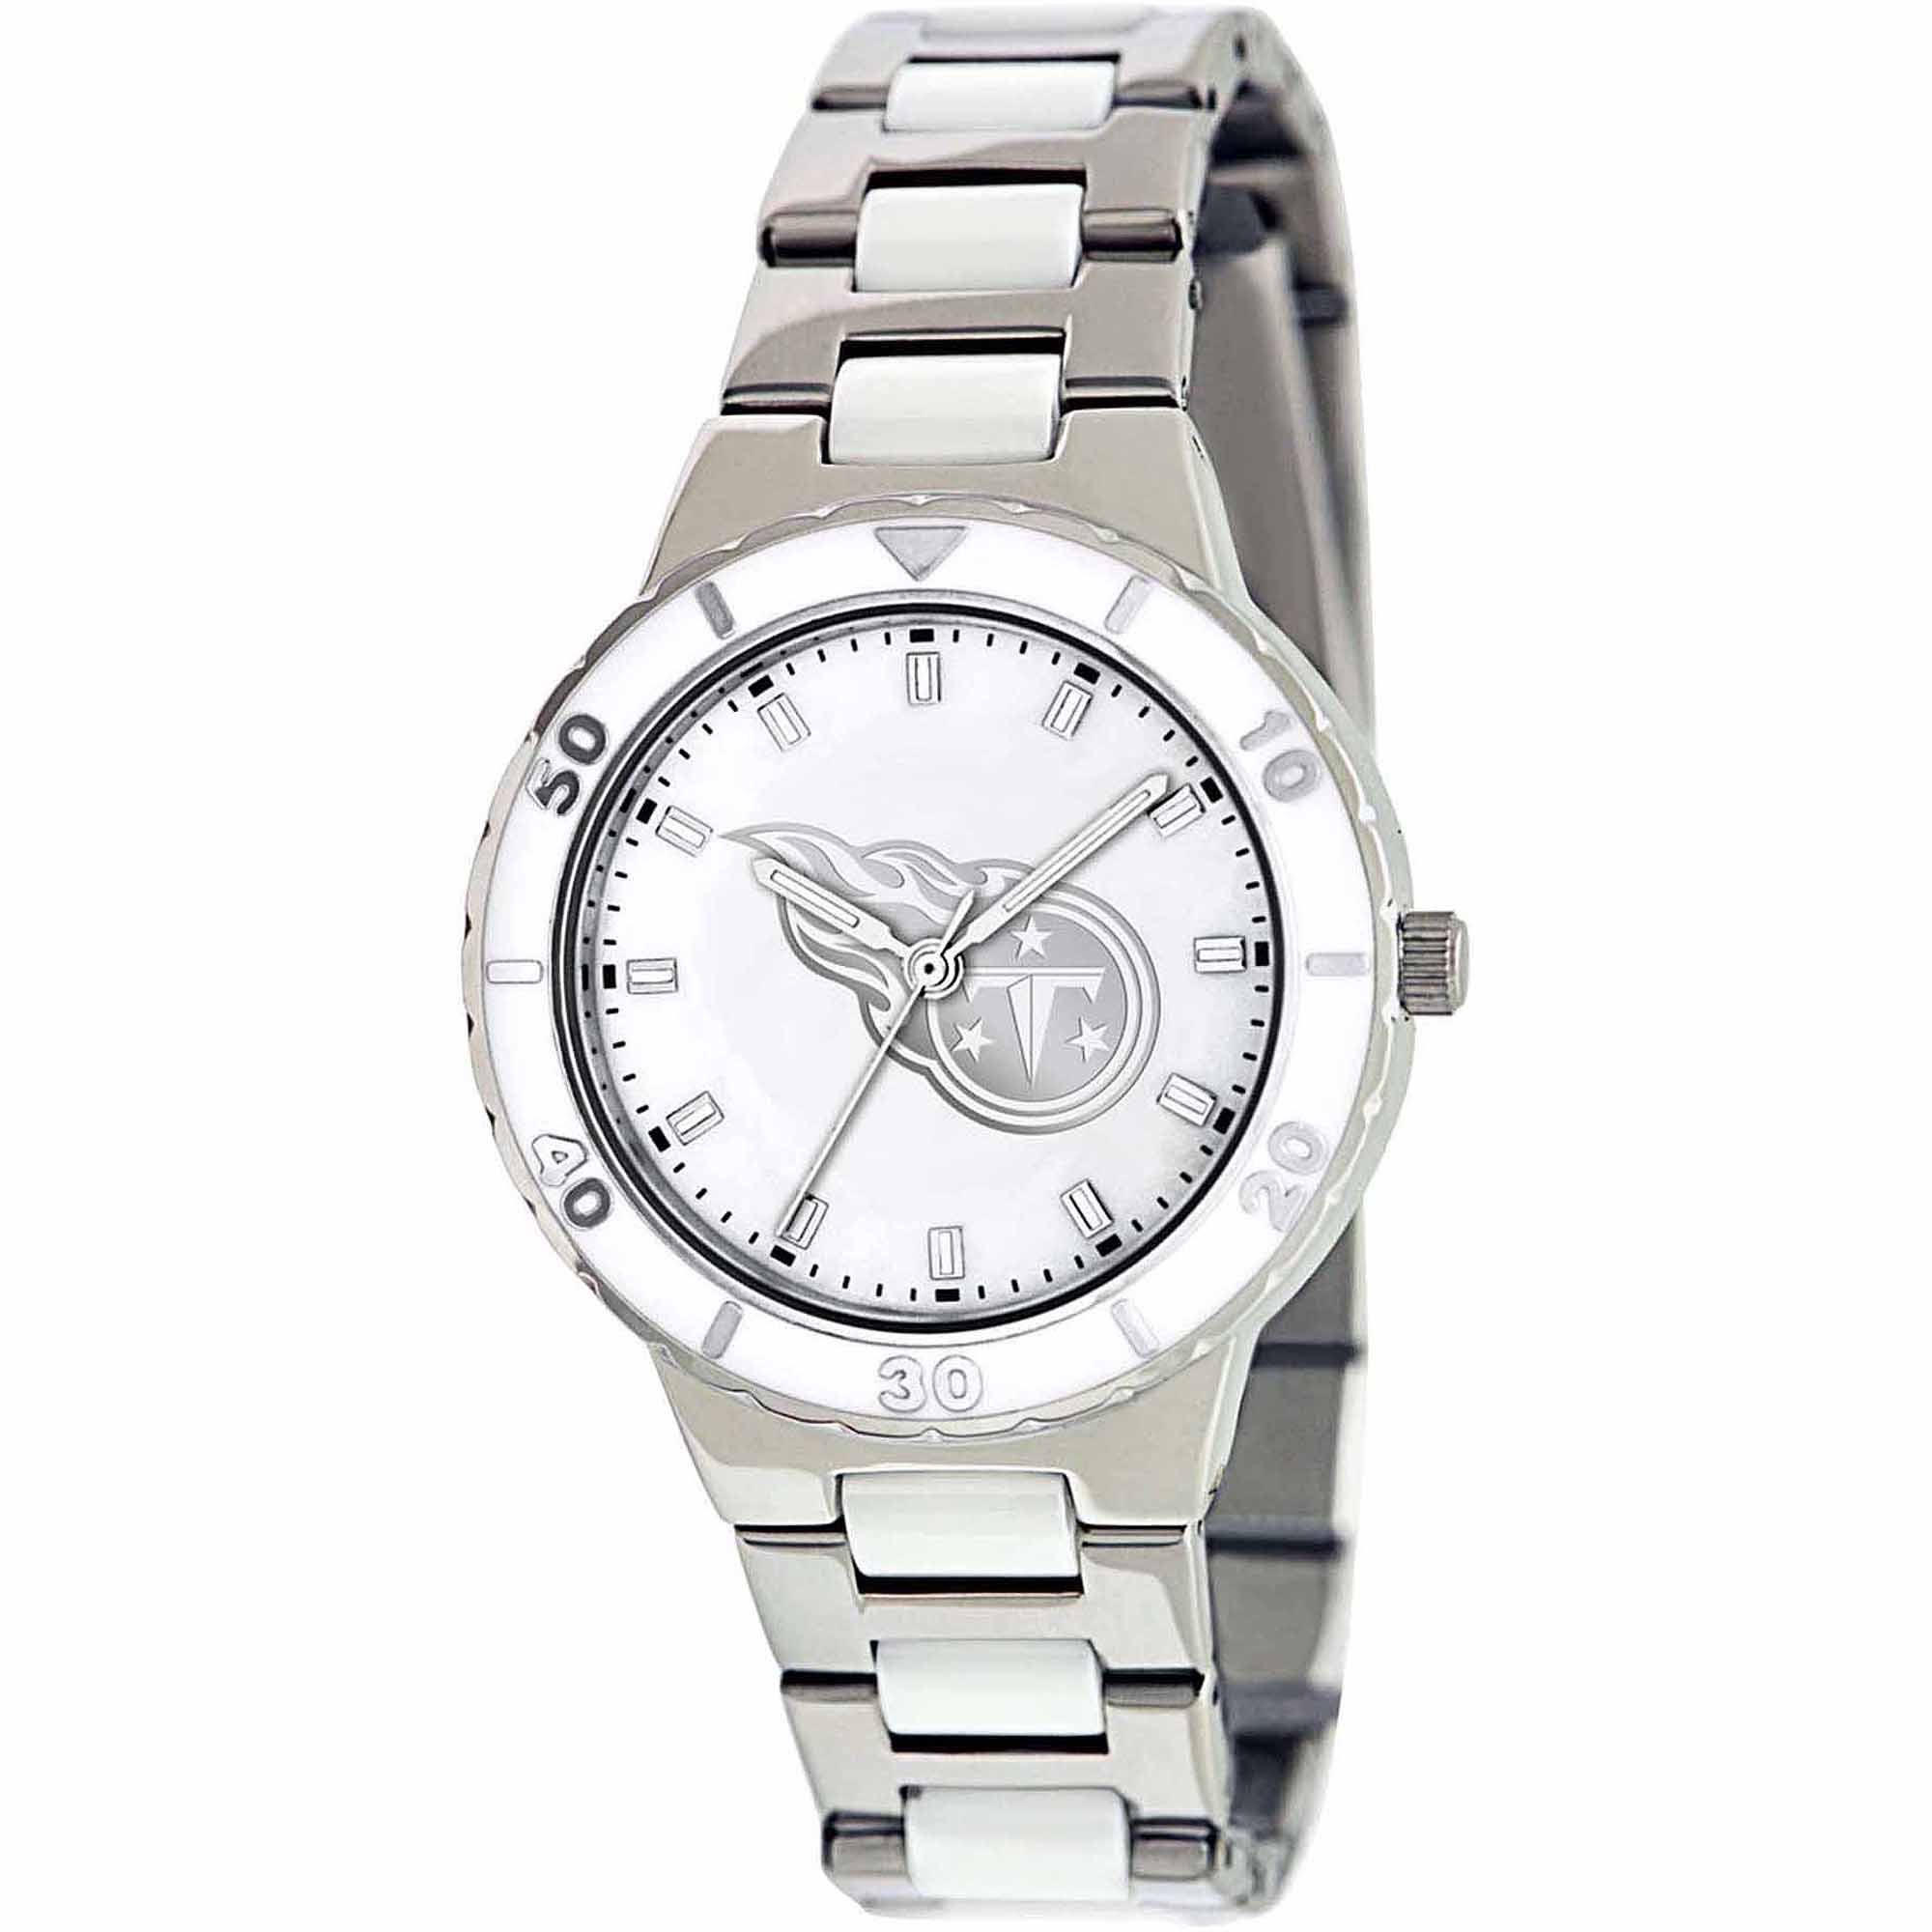 Game Time Watch - NFL Women's Pearl Series, Tennessee Titans - image 1 of 2